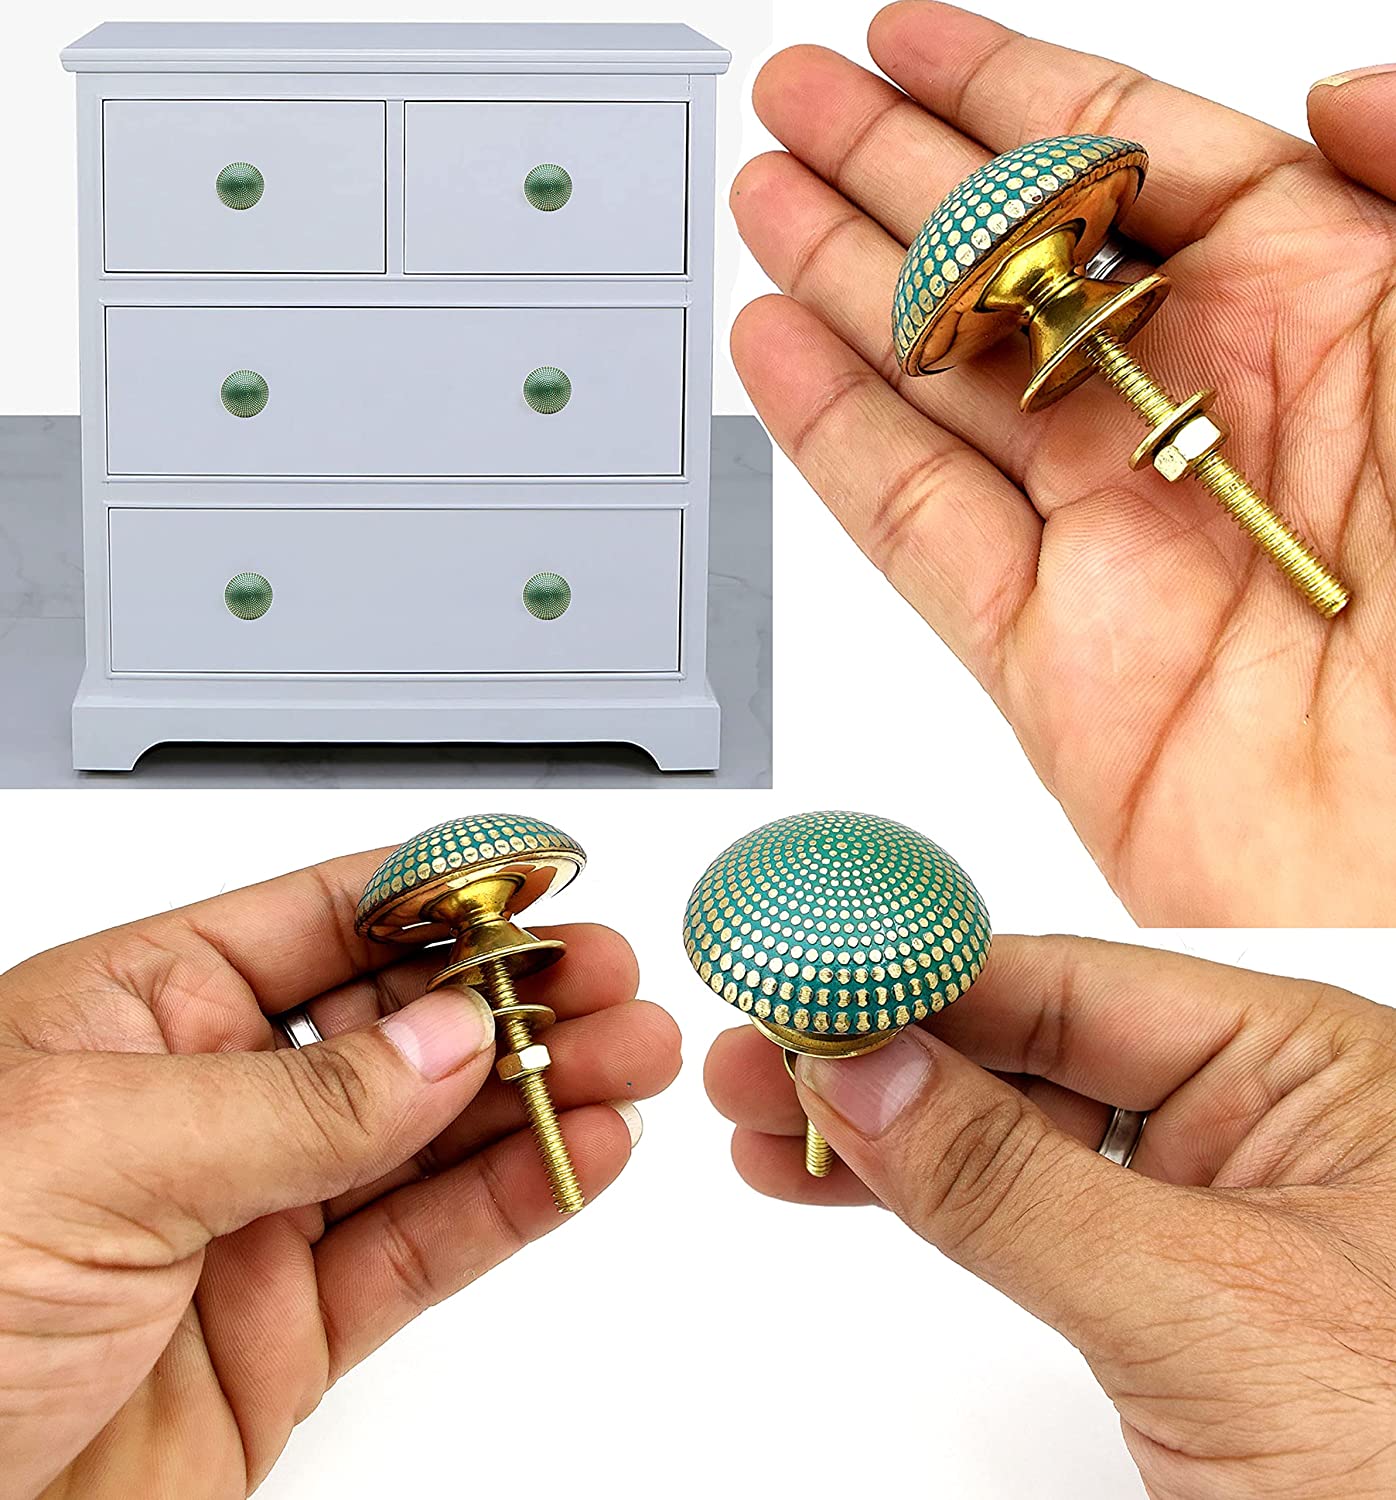 Skull Designer Knobs sideboards Unique original model handmade by Italian craftsman Antique Bronze colored metal chest of drawers cupboards Ideal for furniture 0,78 x 1,1 x 0,78 In wardrobes 